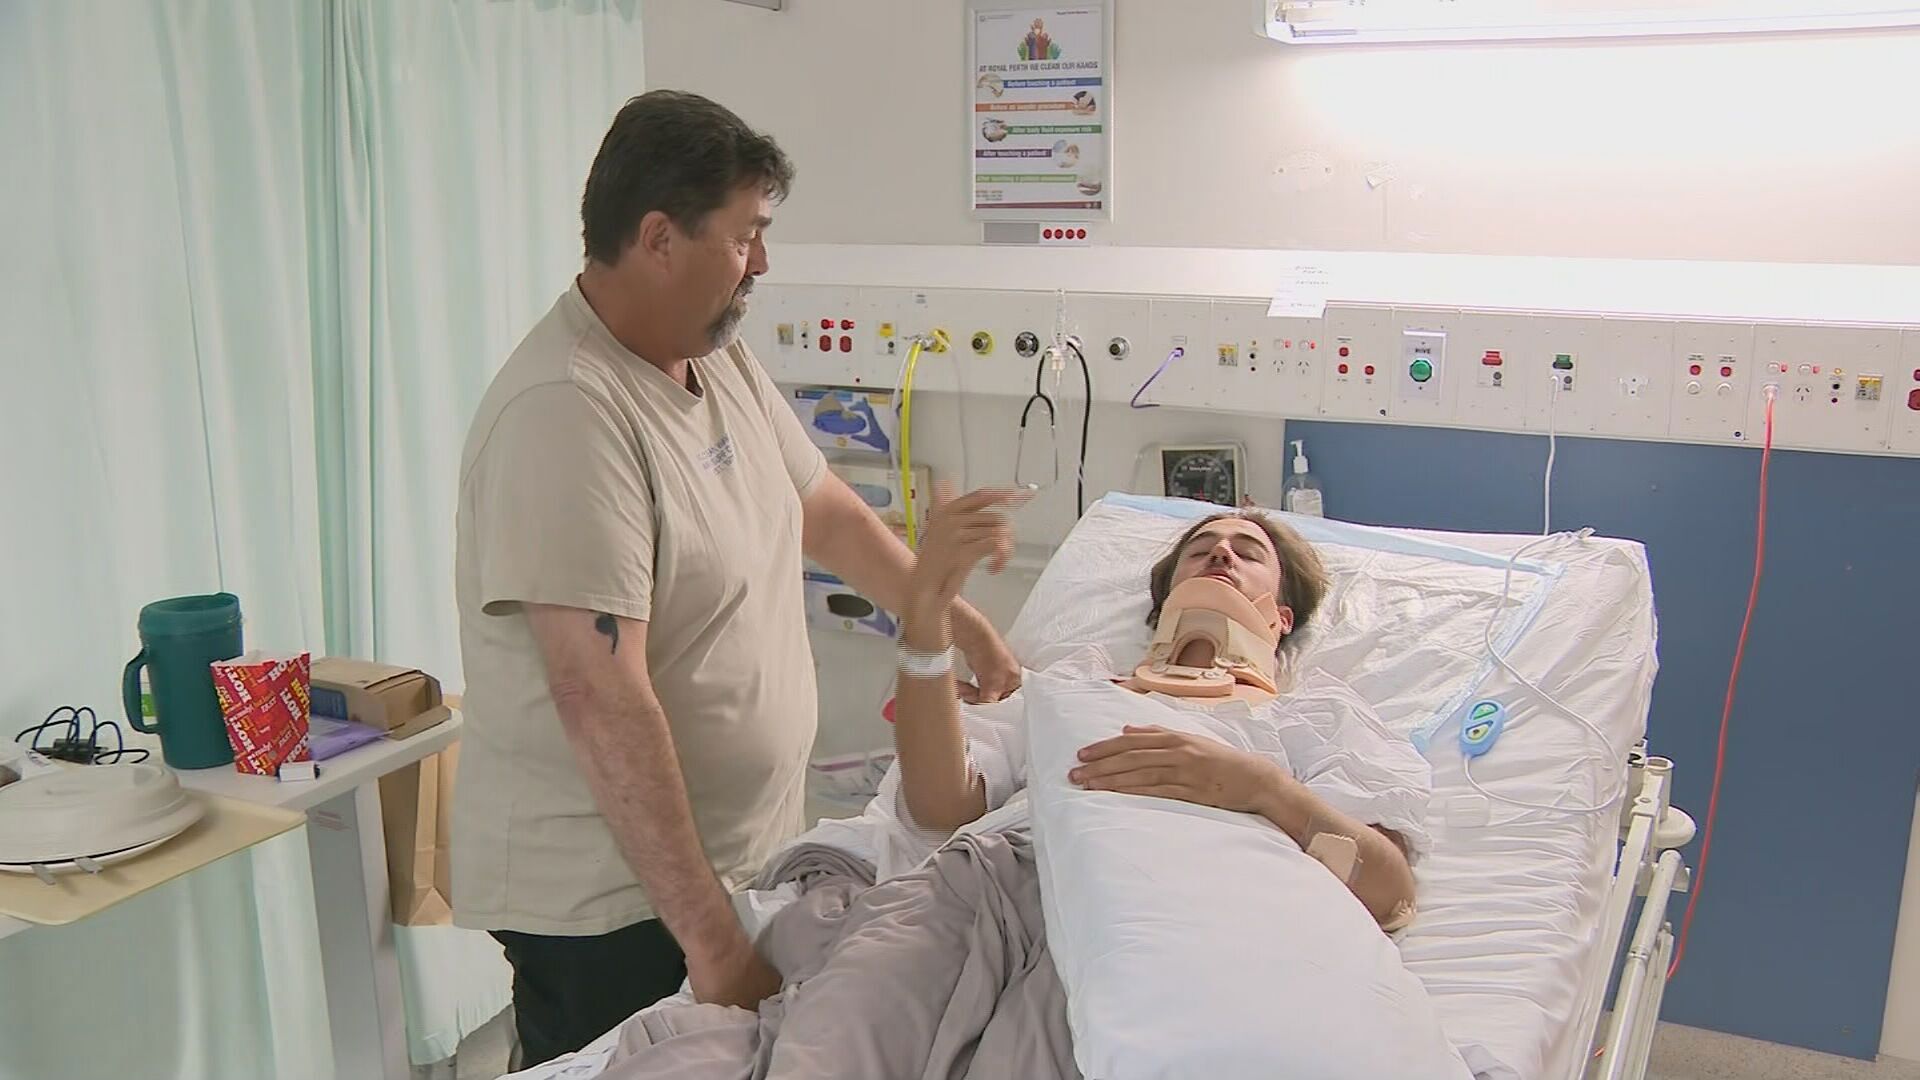 A 16-year-old boy who survived a 10-metre cliff plunge while hiking in Martin, south-east of Perth, has spoken from hospital.